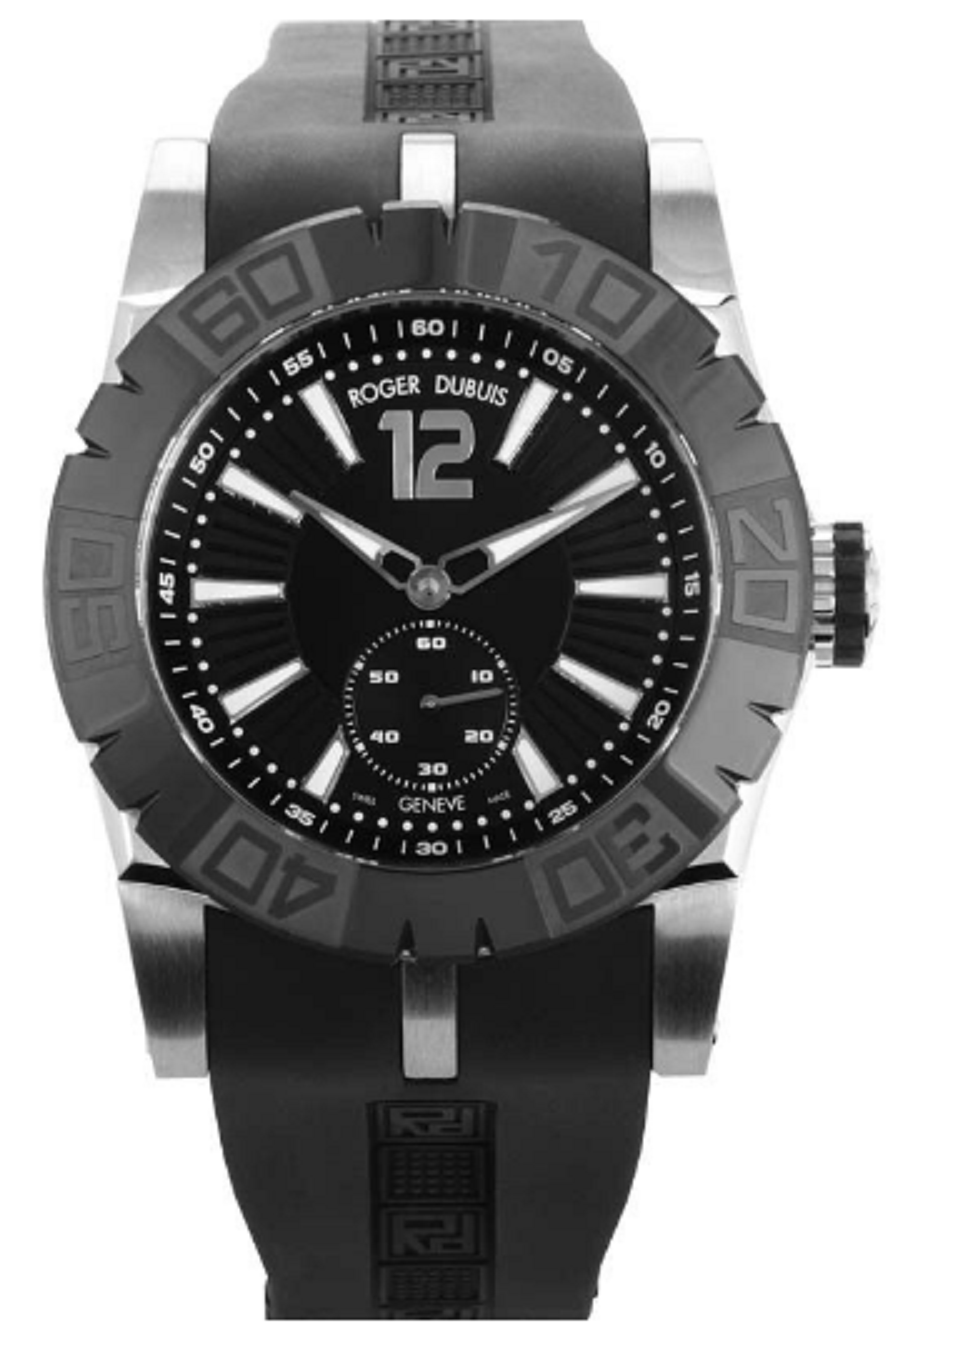 Replica Roger Dubuis Easy Diver 46mm-Steel RDDBSE0271